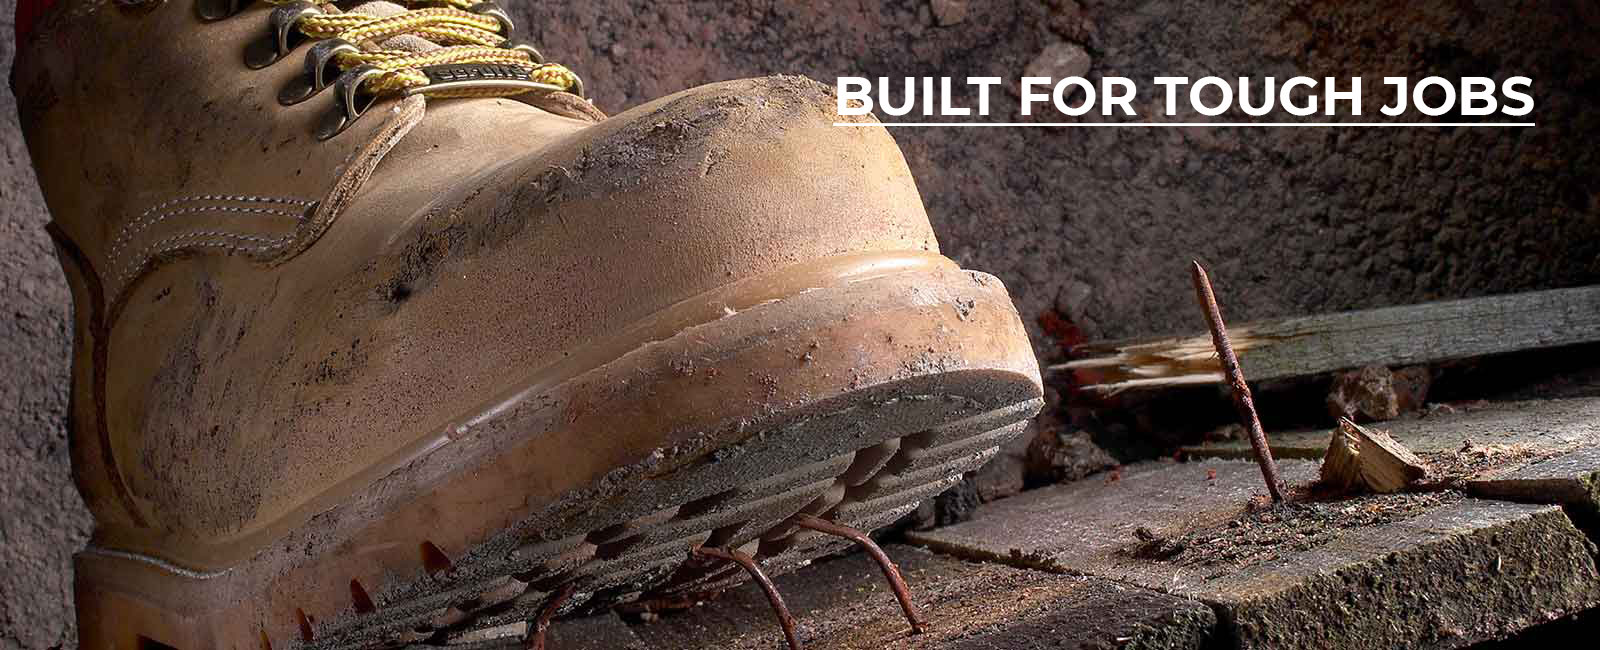 Safety Shoes Manufacturers in Chennai